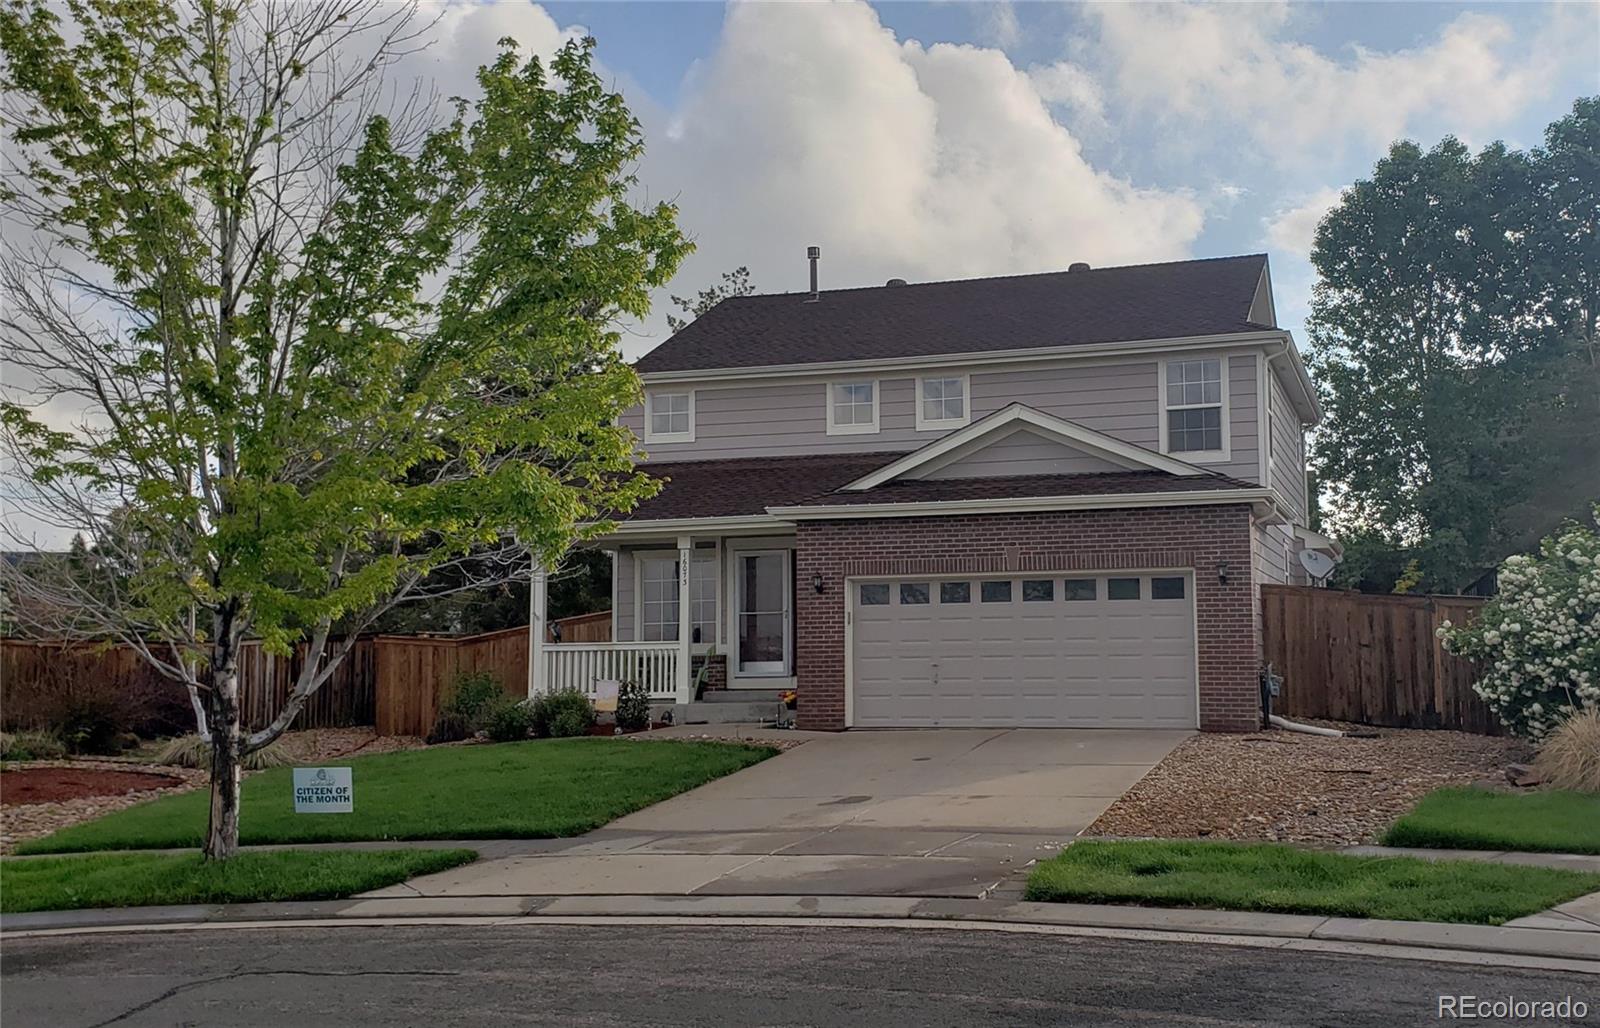 16073 E 105th Court, commerce city MLS: 2013662 Beds: 4 Baths: 3 Price: $520,000